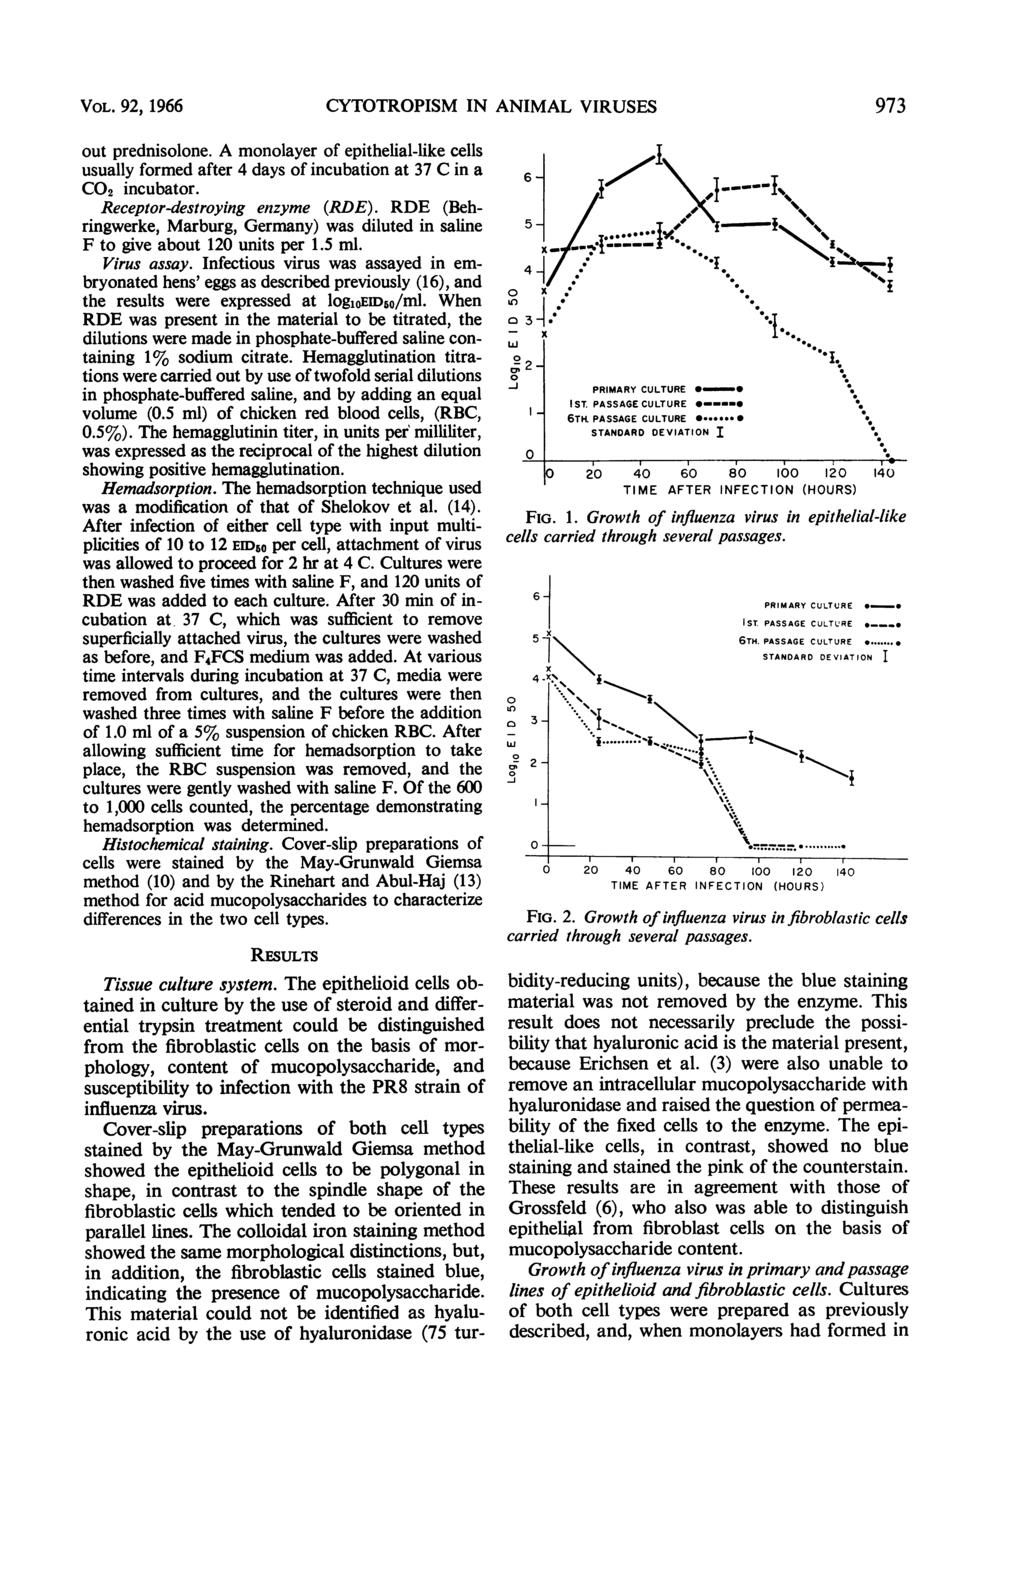 VOL. 92, 1966 CYTOTROPISM IN ANIMAL VIRUSES 973 out prednisolone. A monolayer of epithelial-like cells usually formed after 4 days of incubation at 37 C in a CO2 incubator.